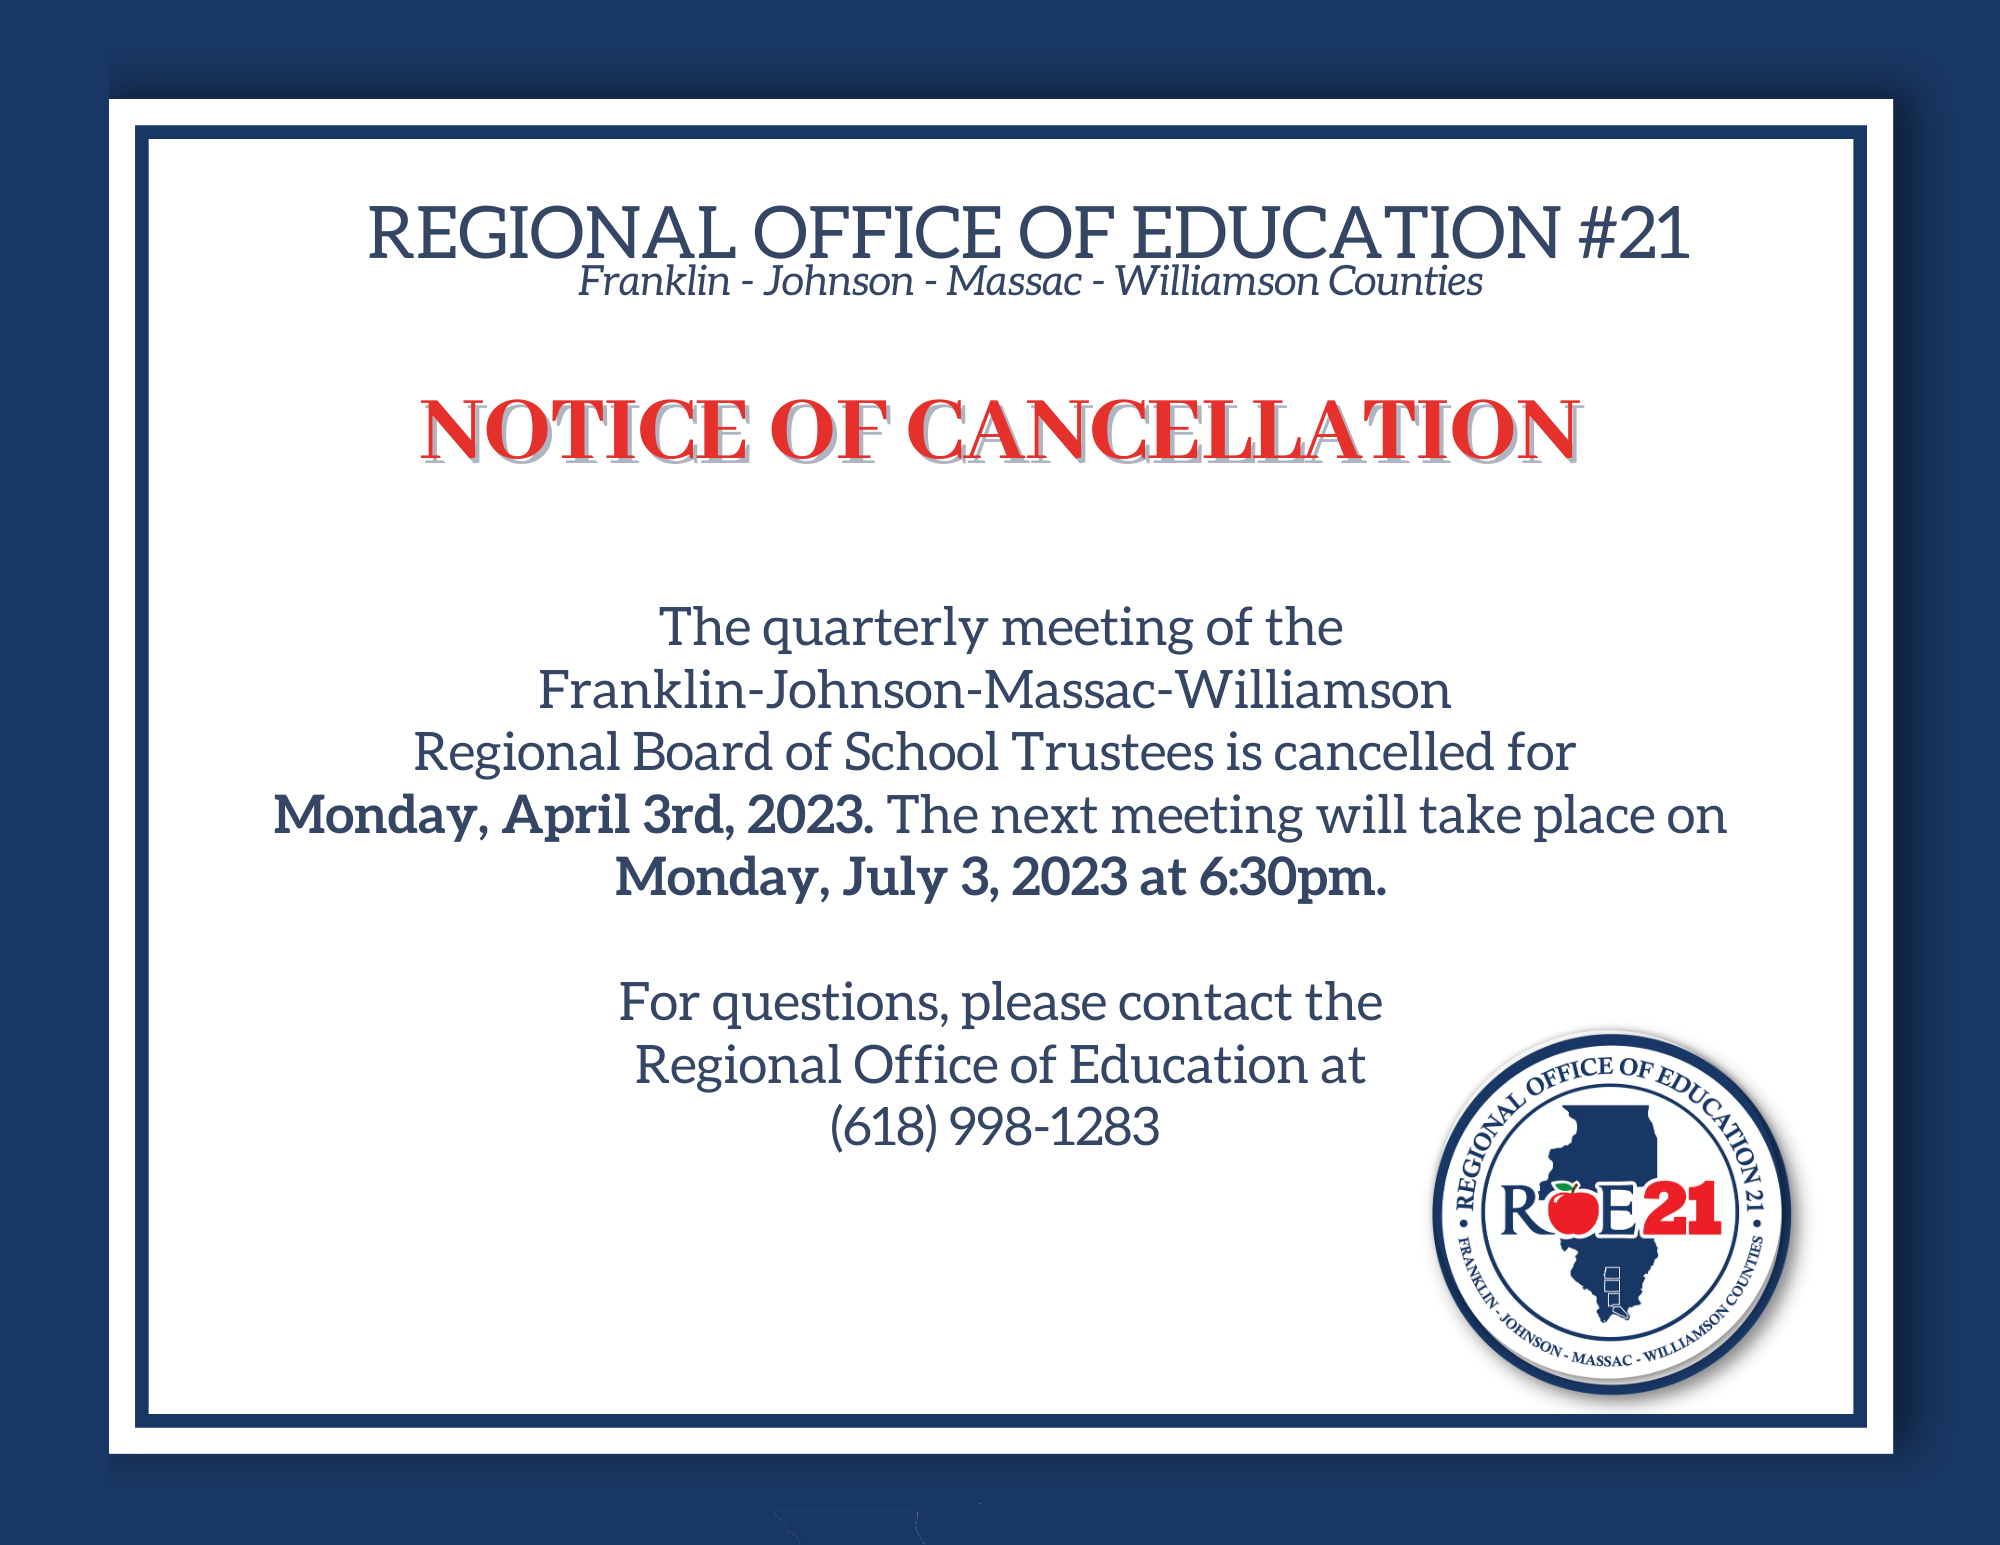 Notice of cancellation - The quarterly meeting of the regional board of school trustees on April 3rd has been cancelled. The next meeting is July 3rd.